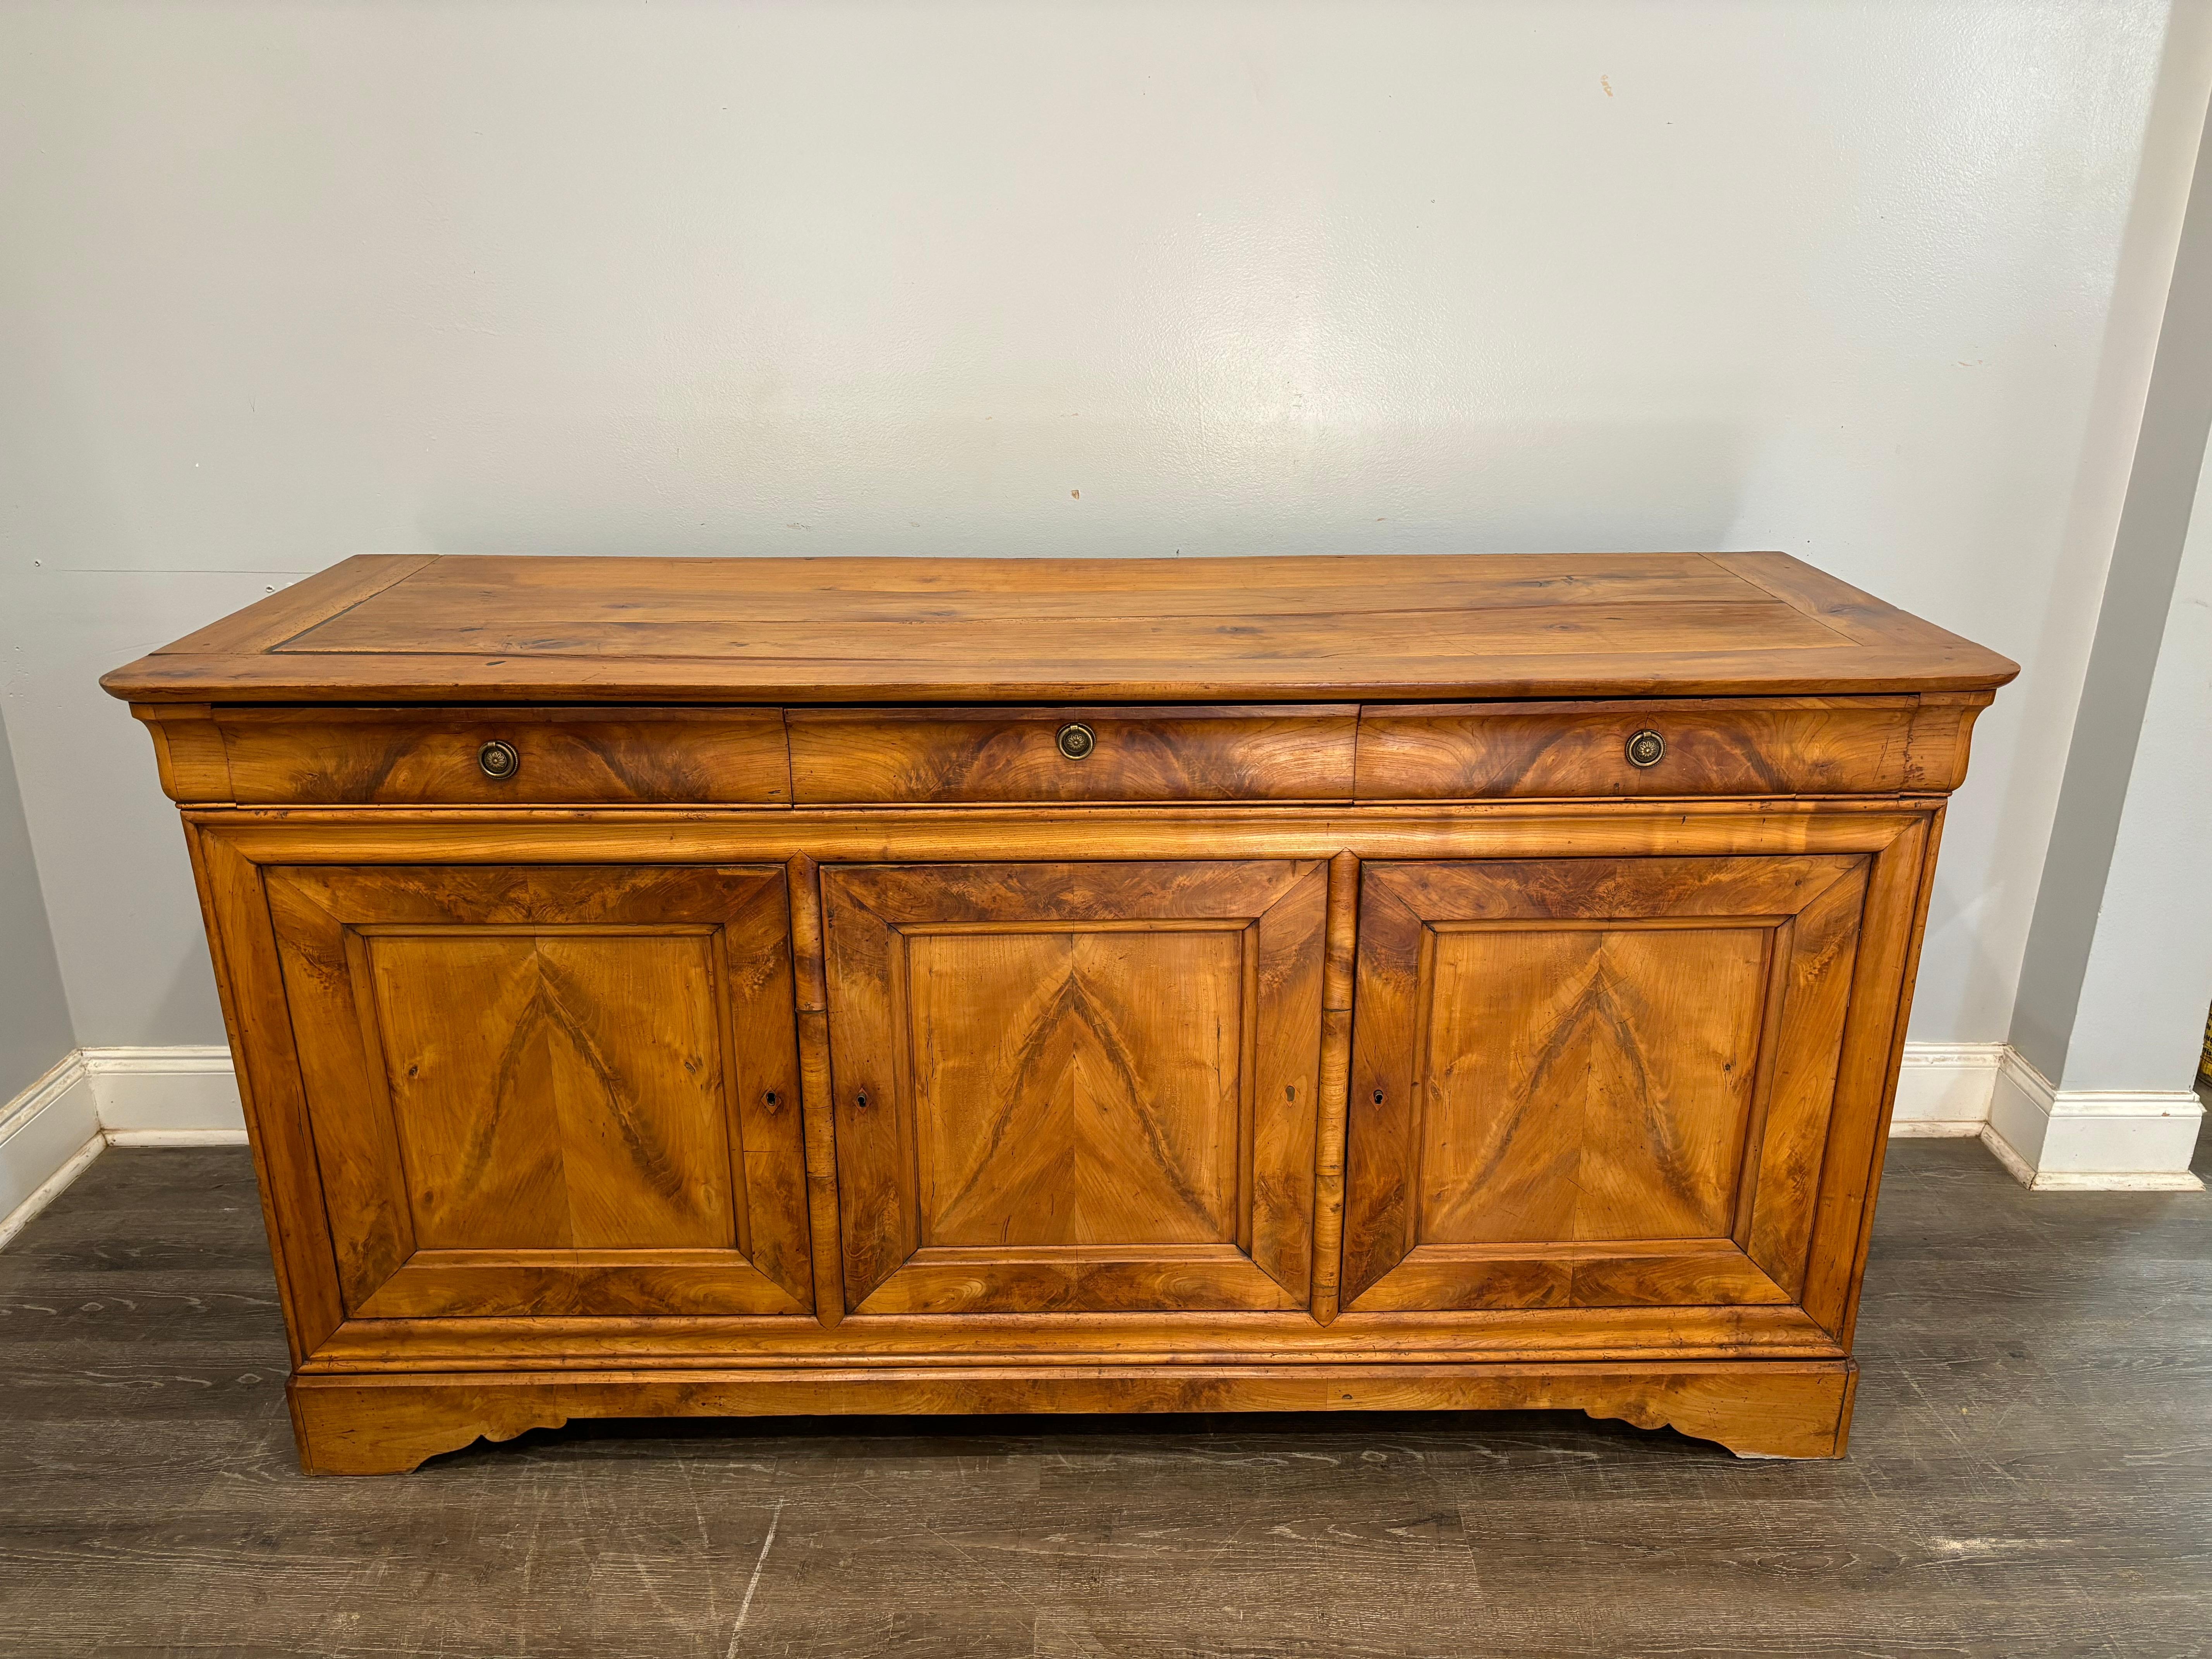 This wonderful sideboard is made of flamed walnut, the pattern of the wood is just beautiful.